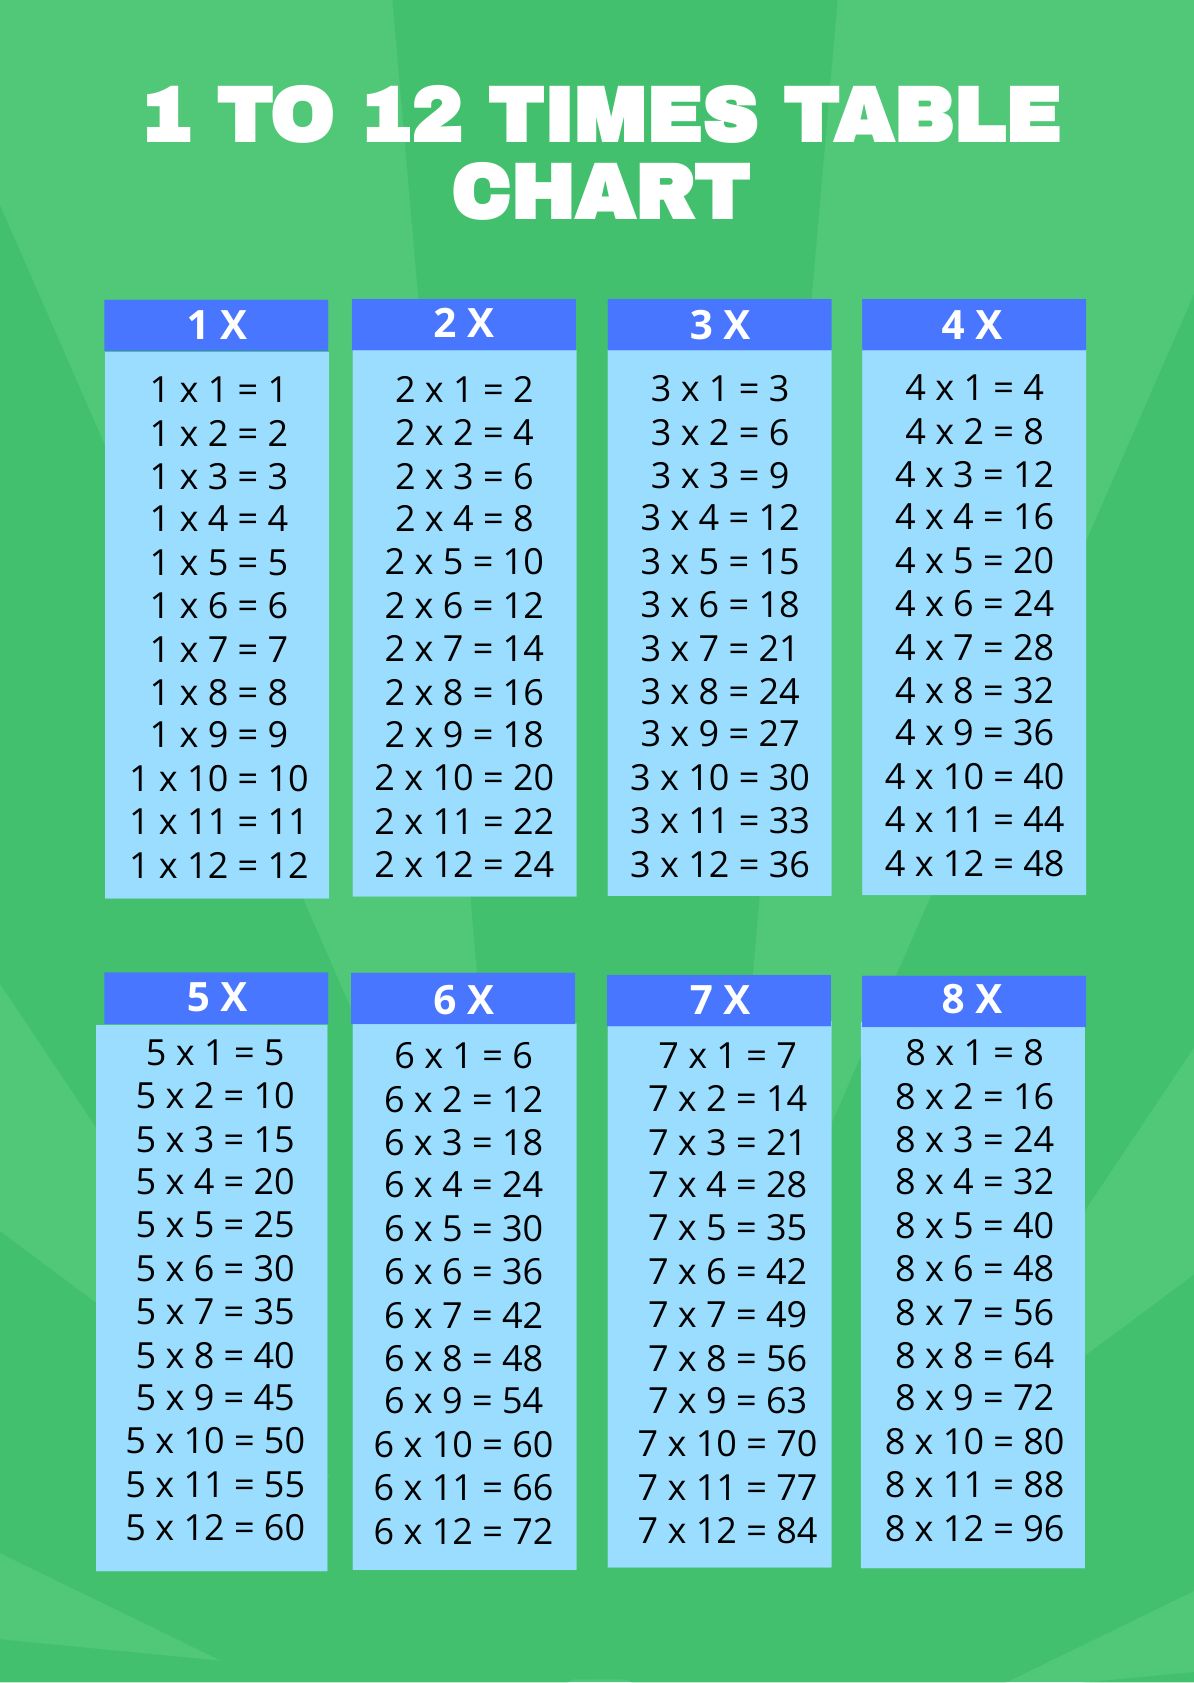 FREE Times Table Chart Template Download in Word Google Docs PDF